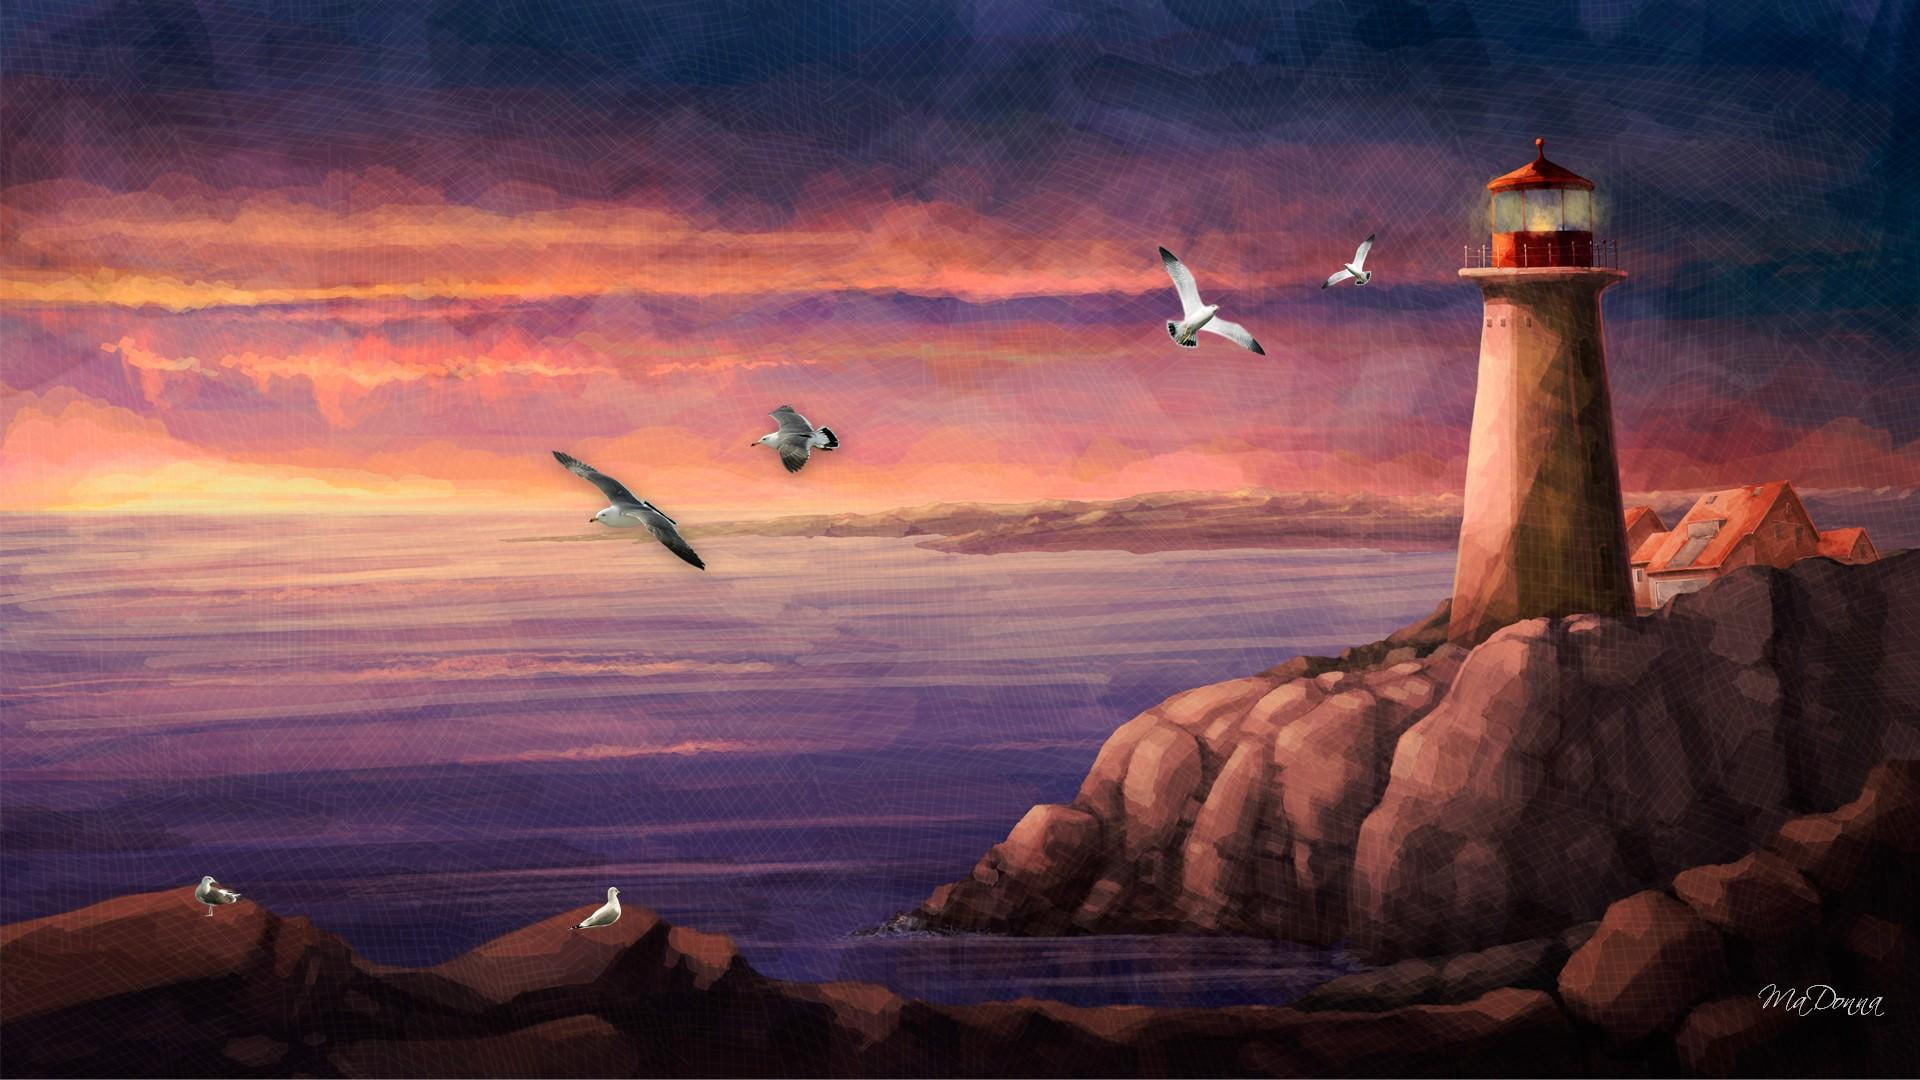 The Lighthouse Sunset, paint, sea gulls, shore, watercolor, dom